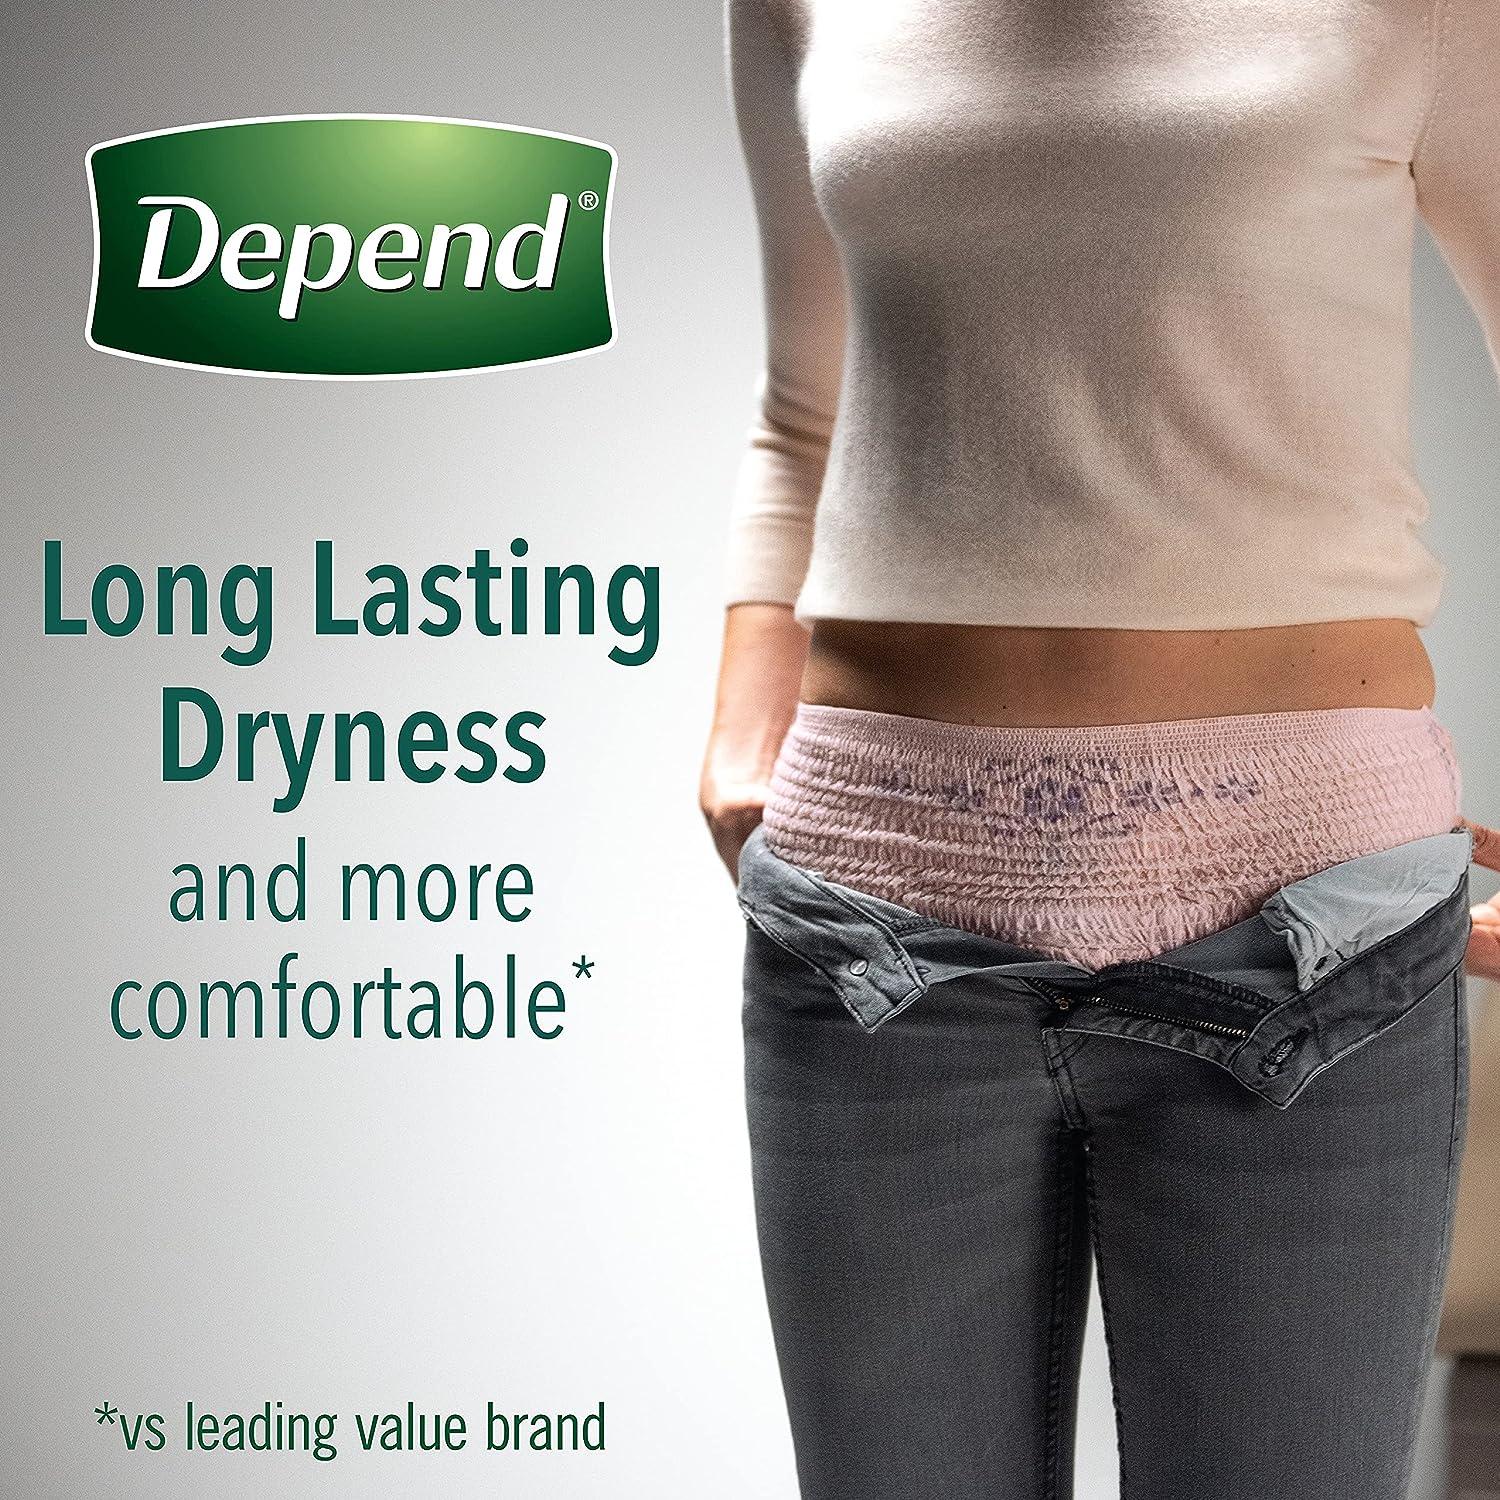 Depend Fit-Flex Adult Incontinence Underwear for Women, Disposable, Maximum  Absorbency, Large, Blush, 17 Count, Incontinence